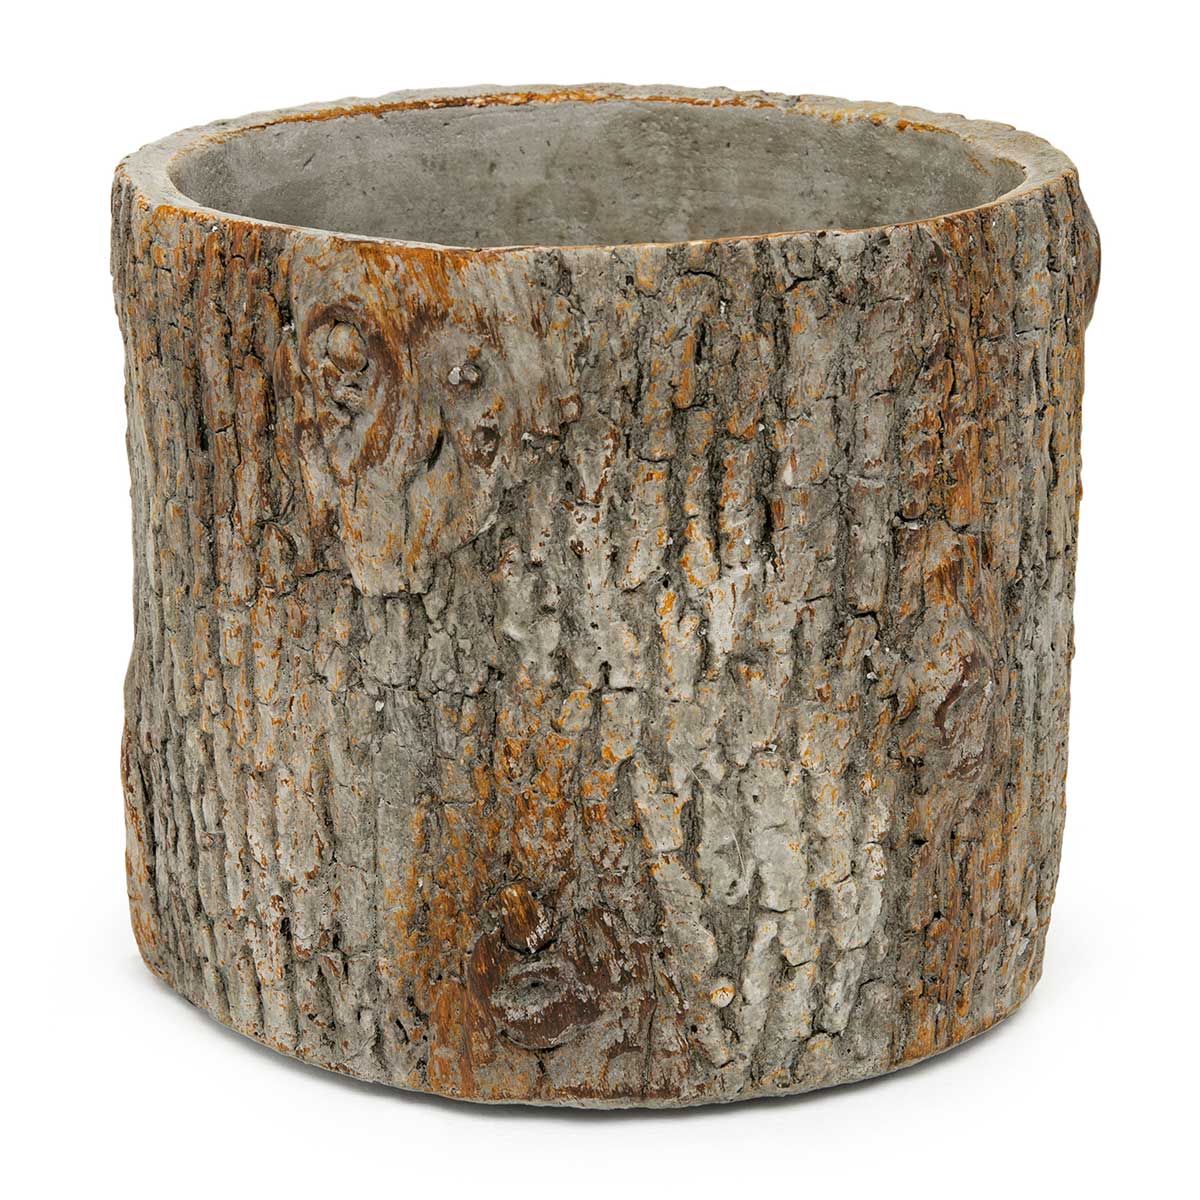 POT TREE TRUNK ROUND 5.5IN X 5IN BROWN CONCRETE - Click Image to Close